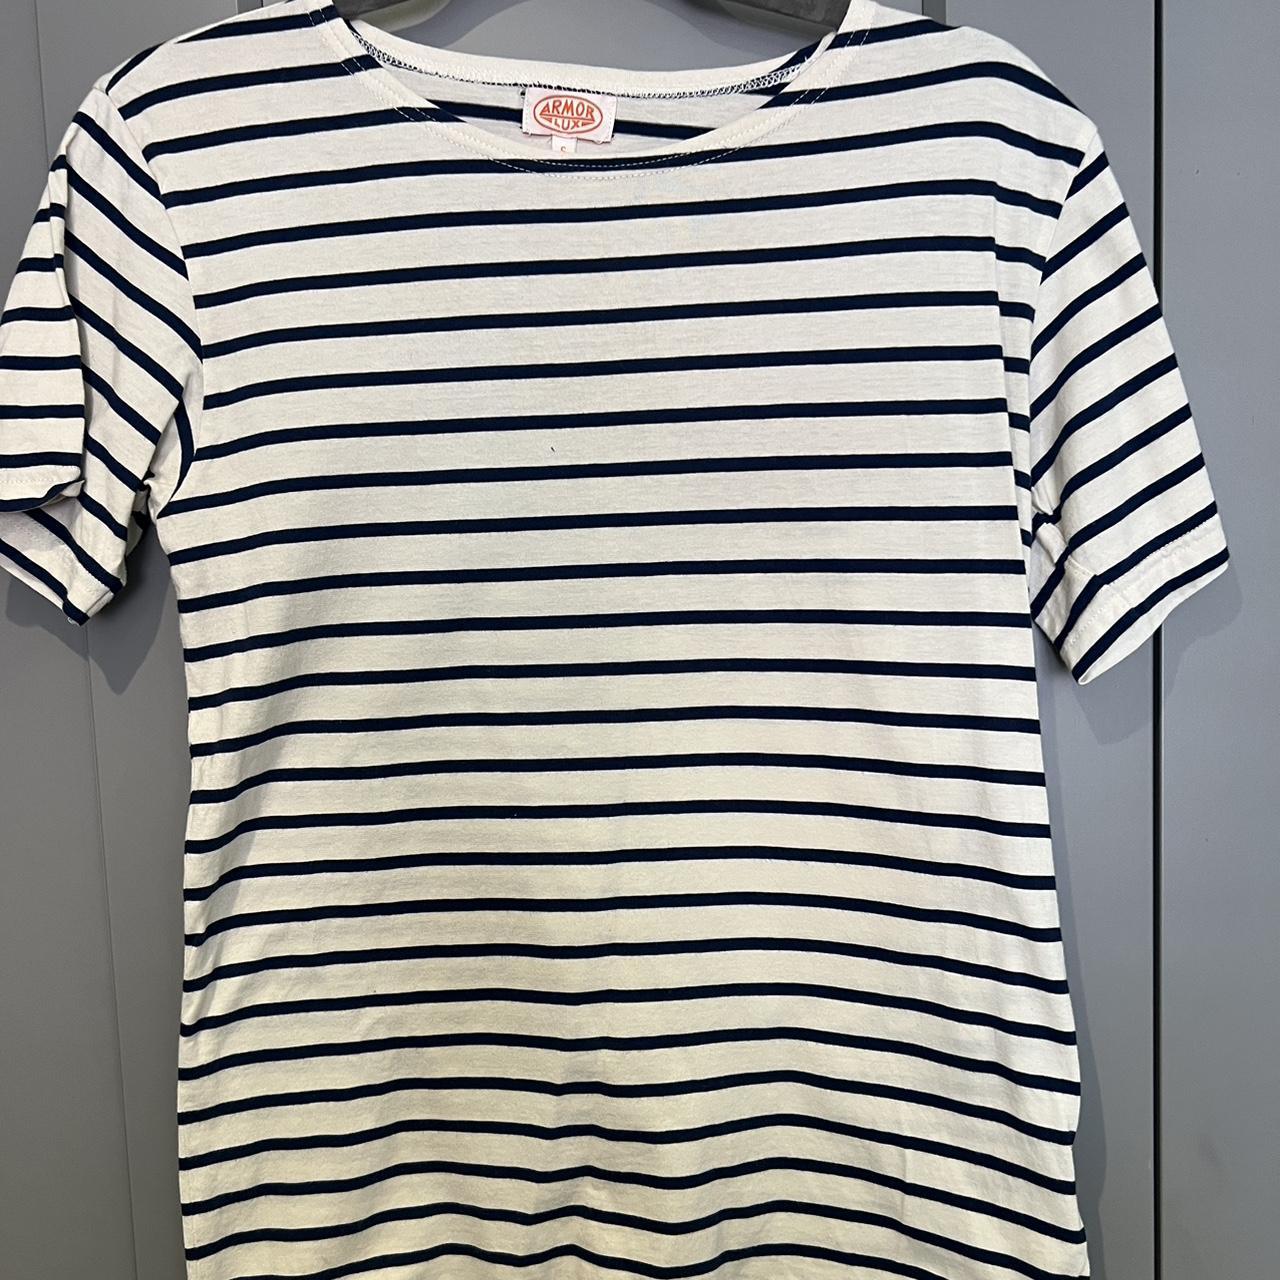 Armor Lux striped tee size small, fits an x-small... - Depop